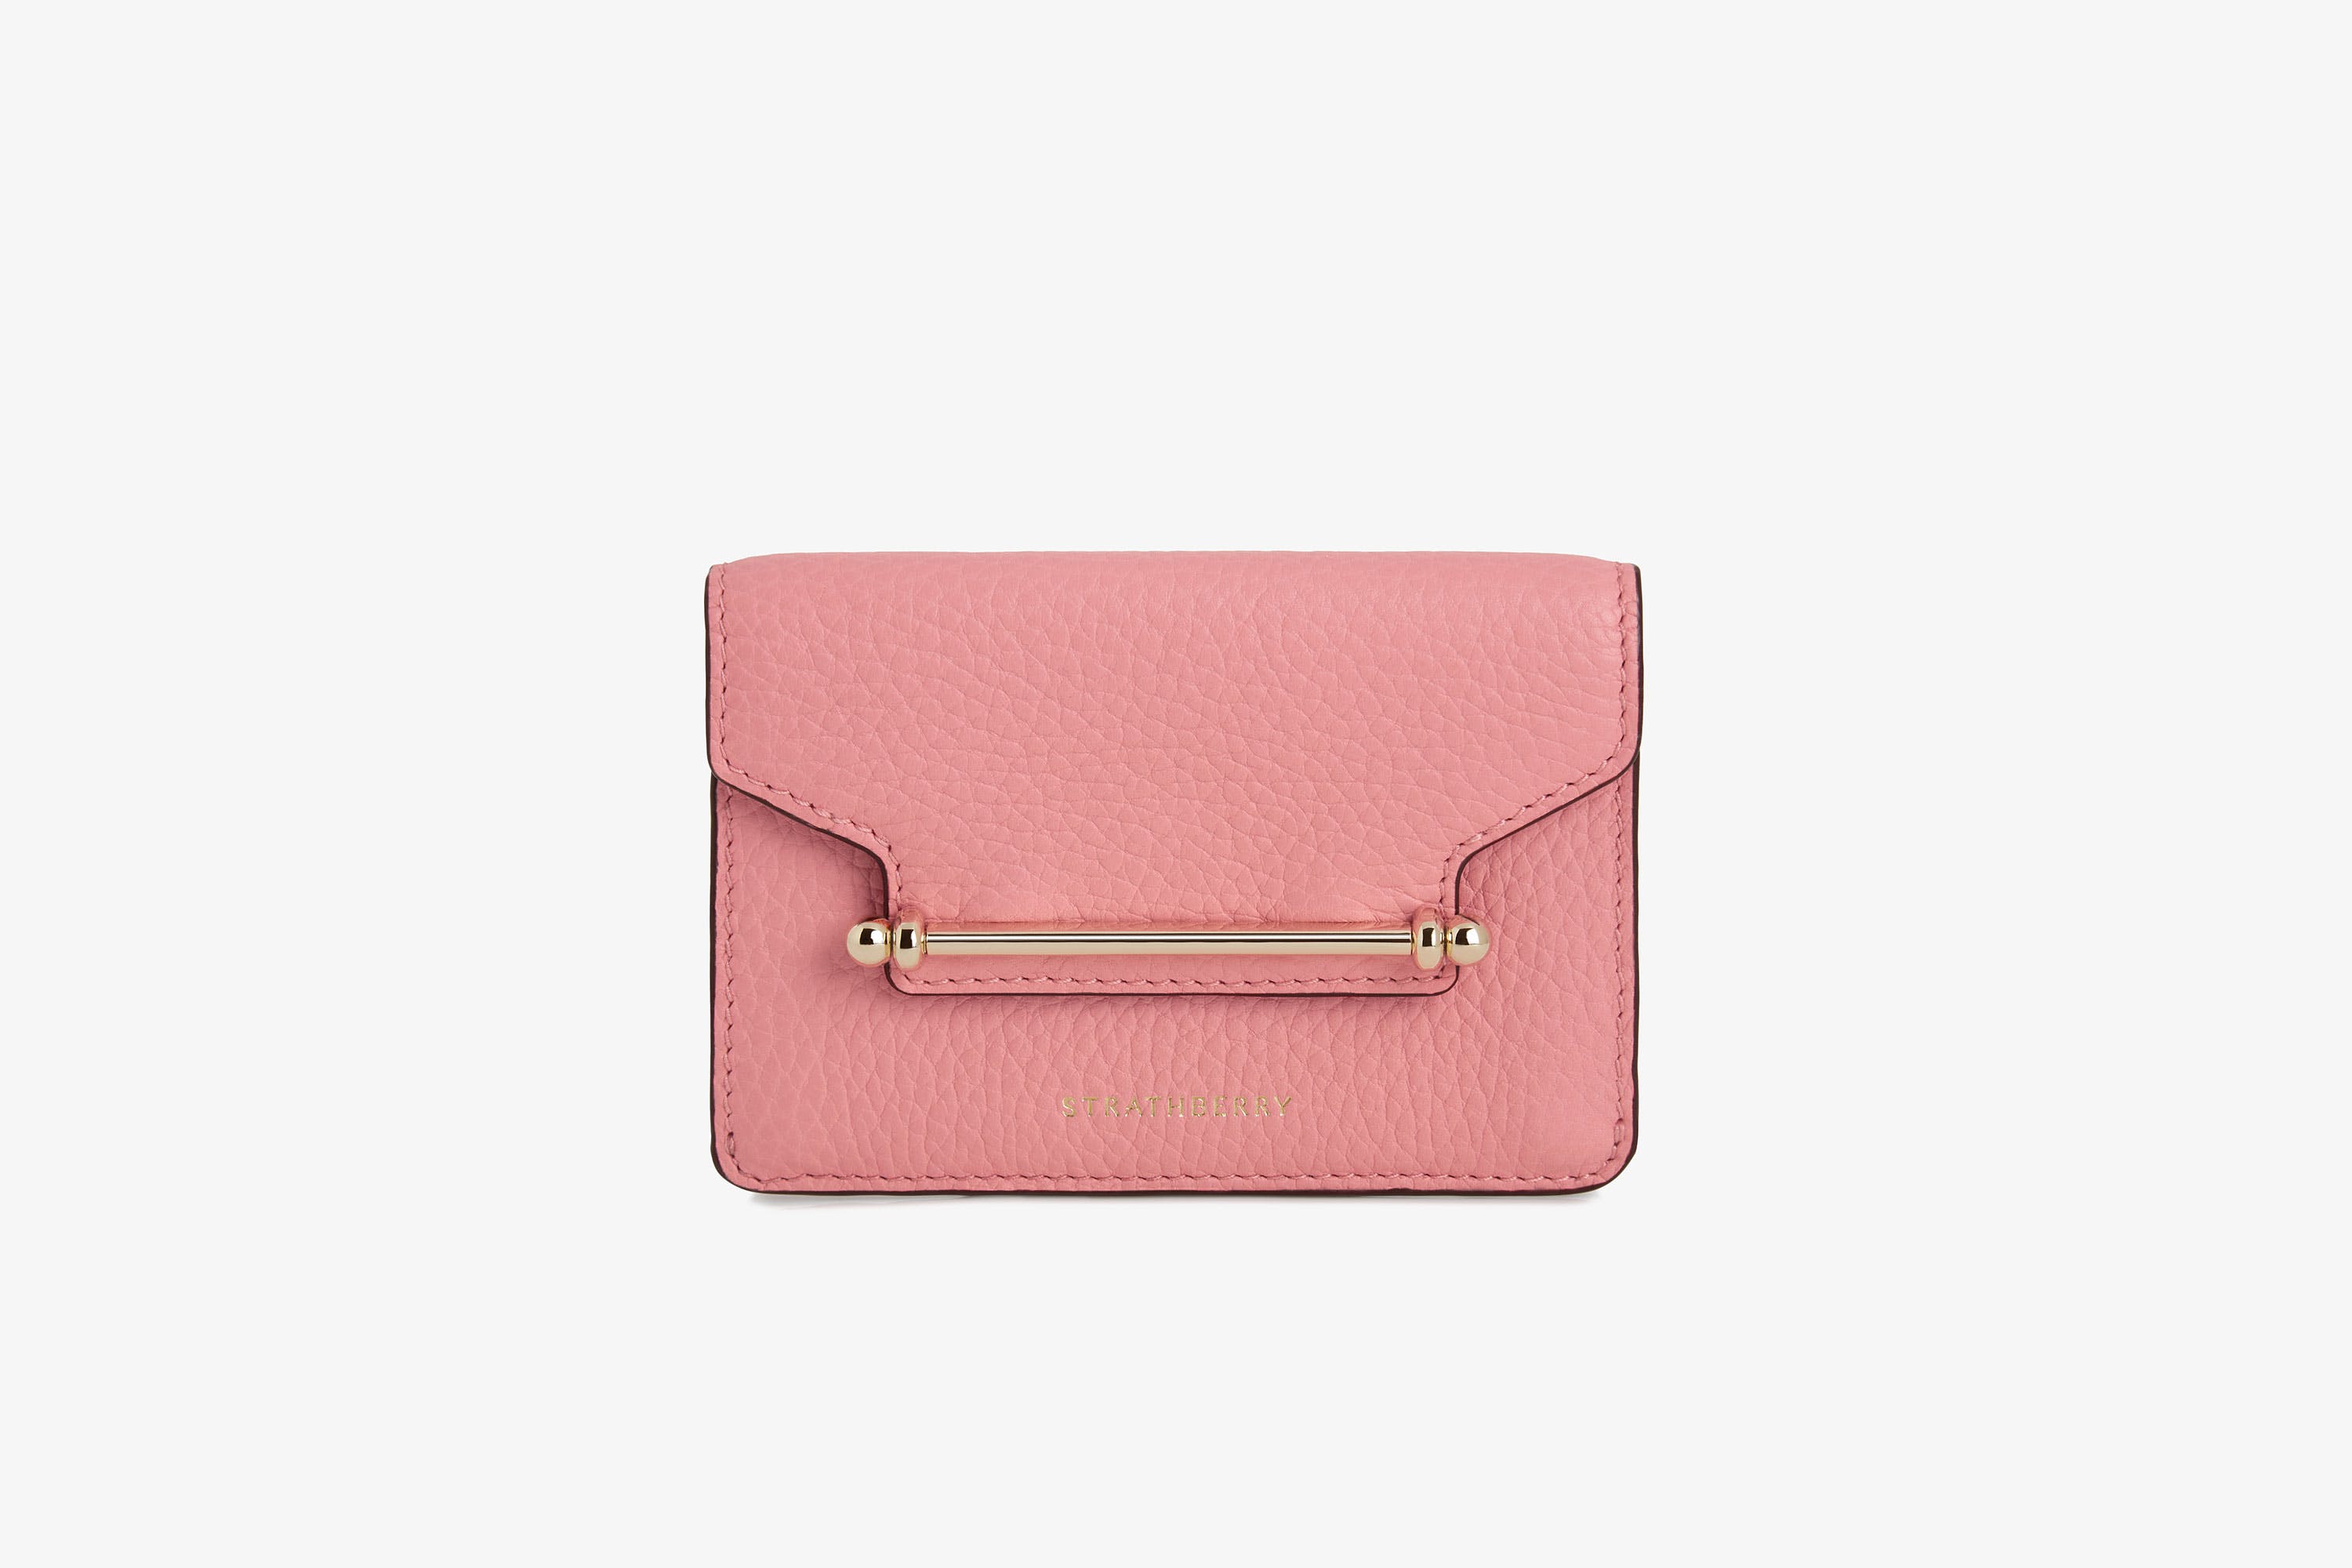 Strathberry - Multrees Compact Wallet - Pink | Strathberry